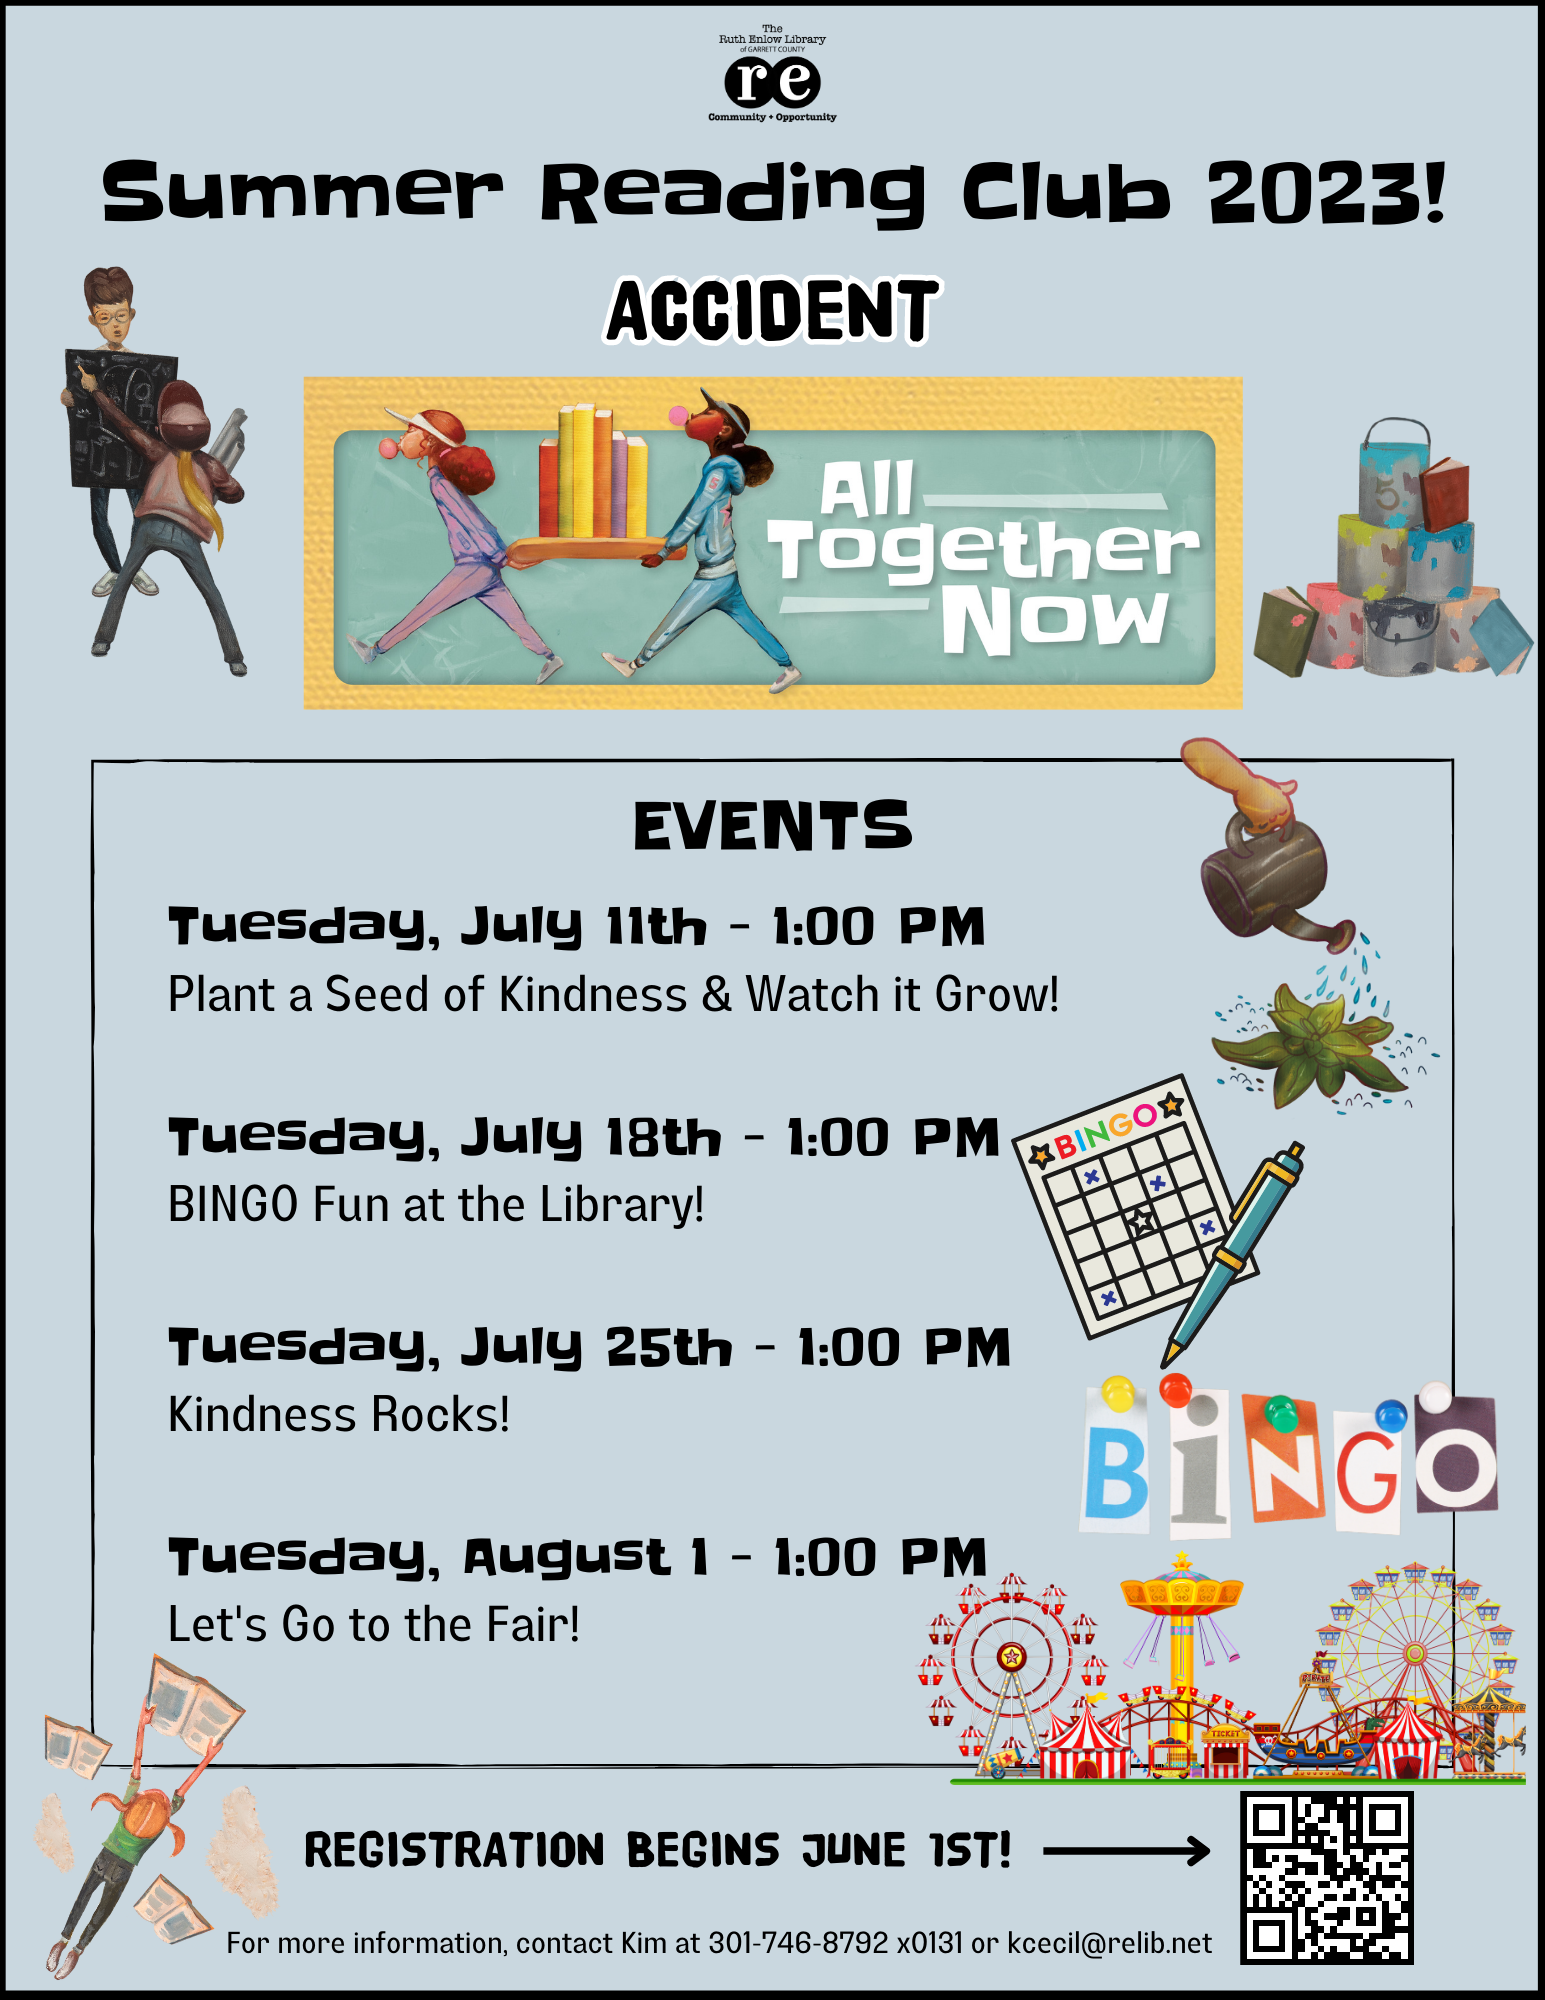 Summer Reading Club Activites at the Accident Branch Library!